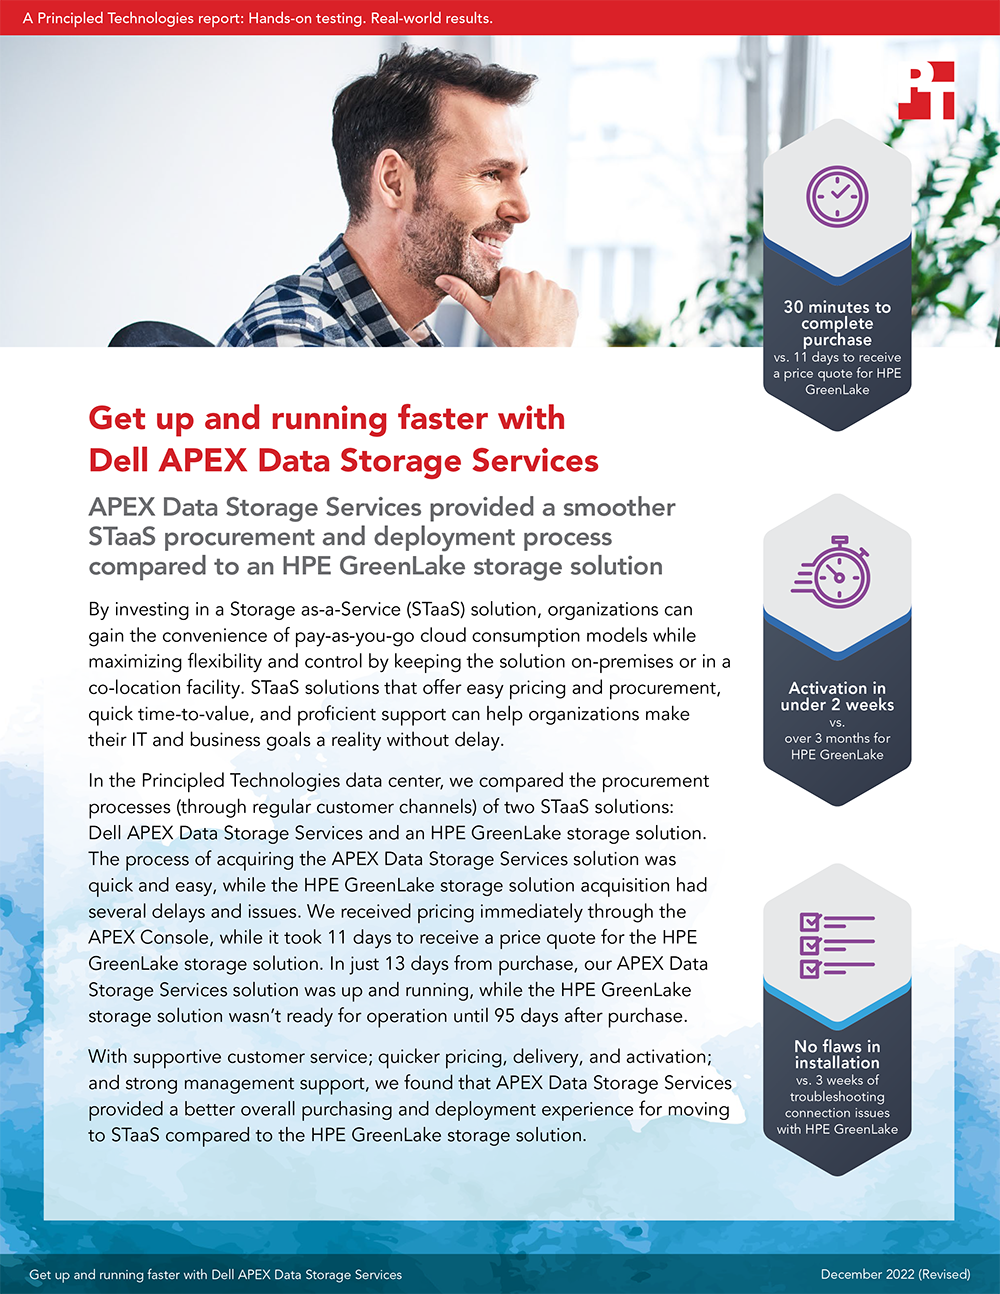 Get up and running faster with Dell APEX Data Storage Services